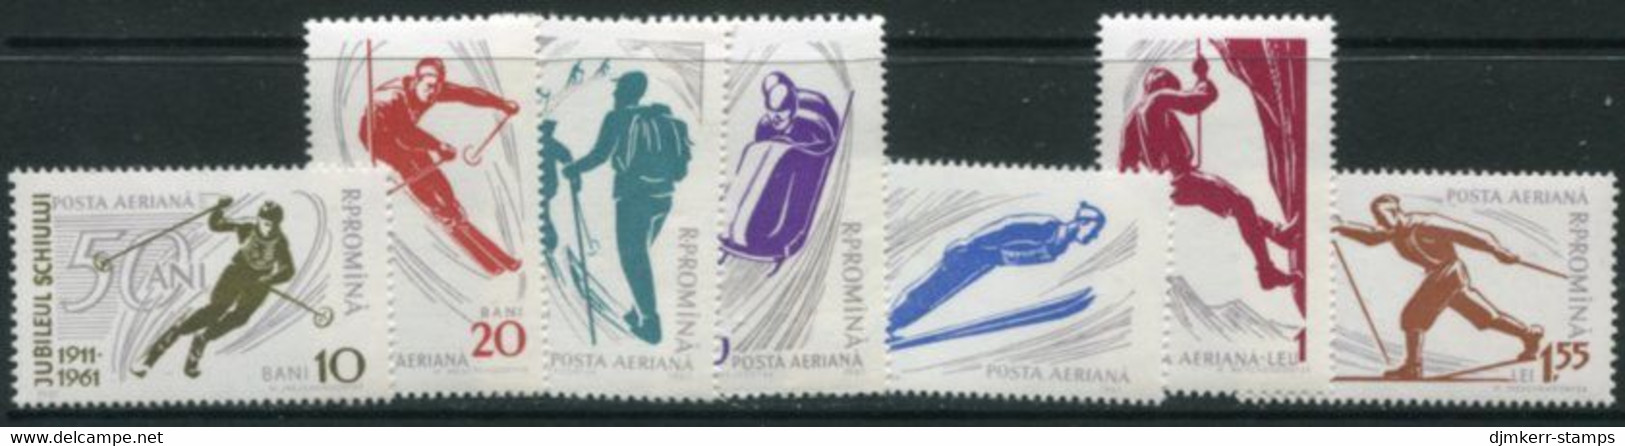 ROMANIA 1961 Winter Sports Perforated LHM / *.  Michel 1951-57 - Unused Stamps